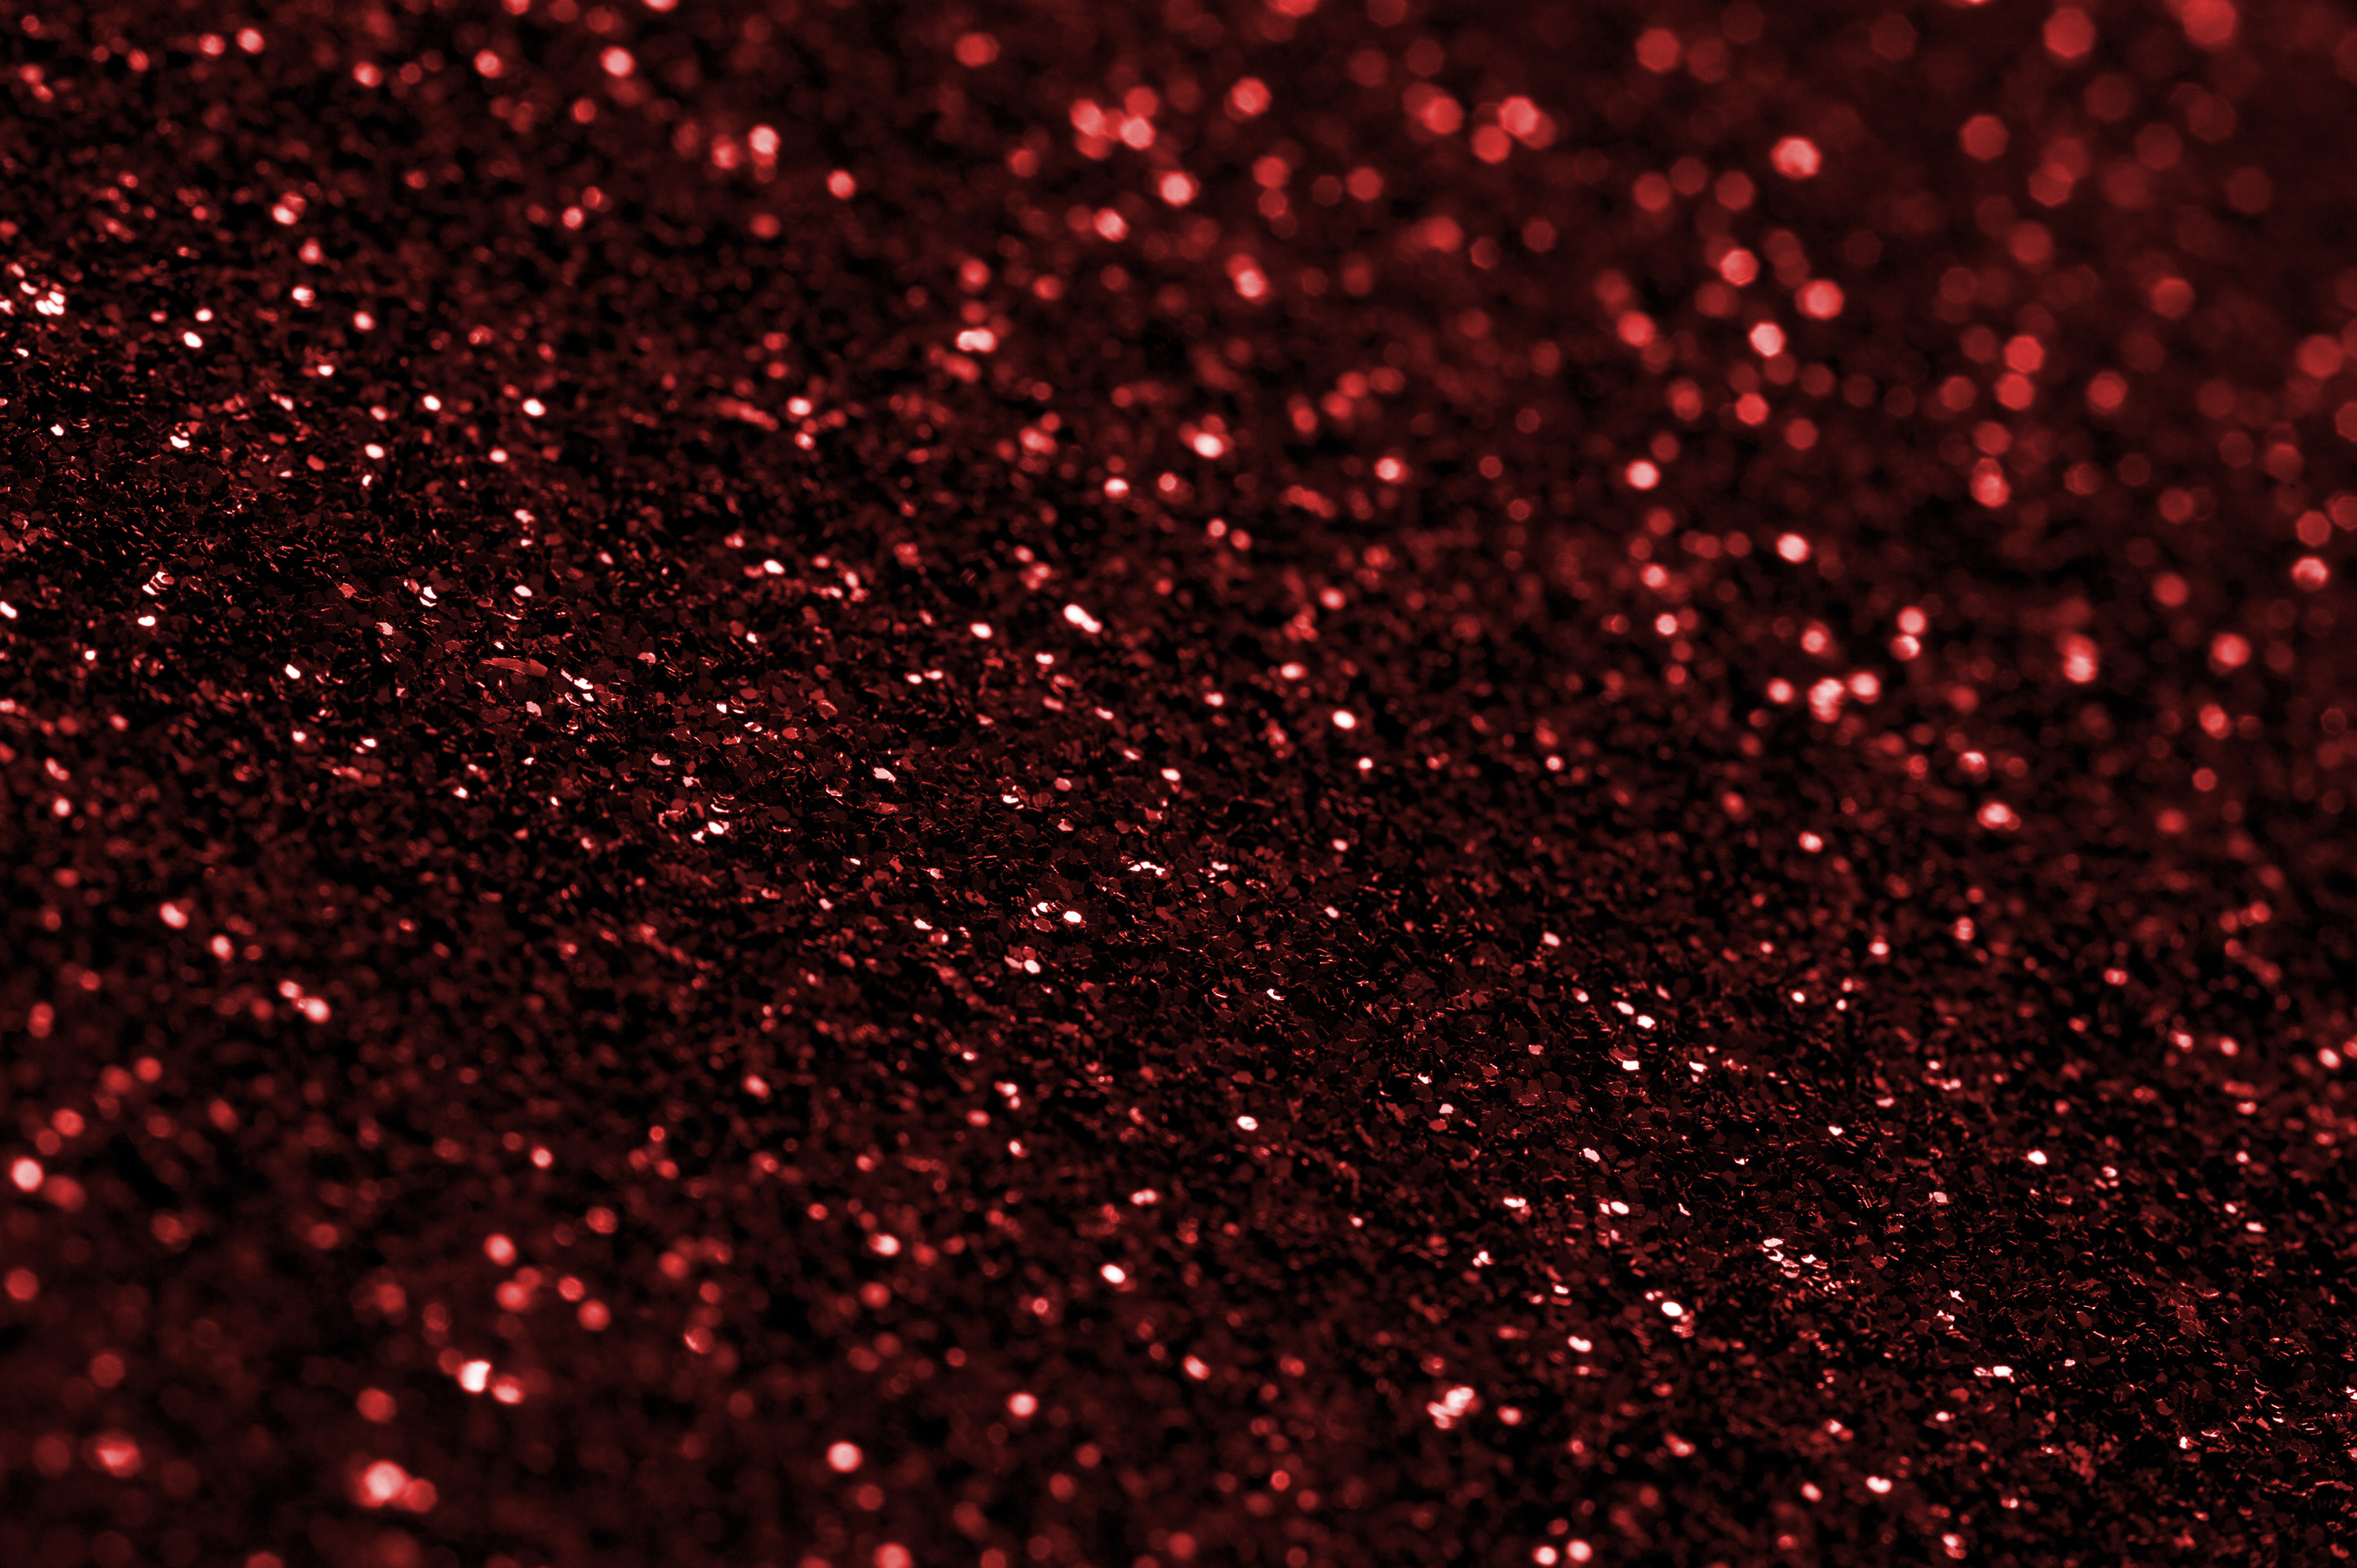 Dark red glitter texture. Free background and textures